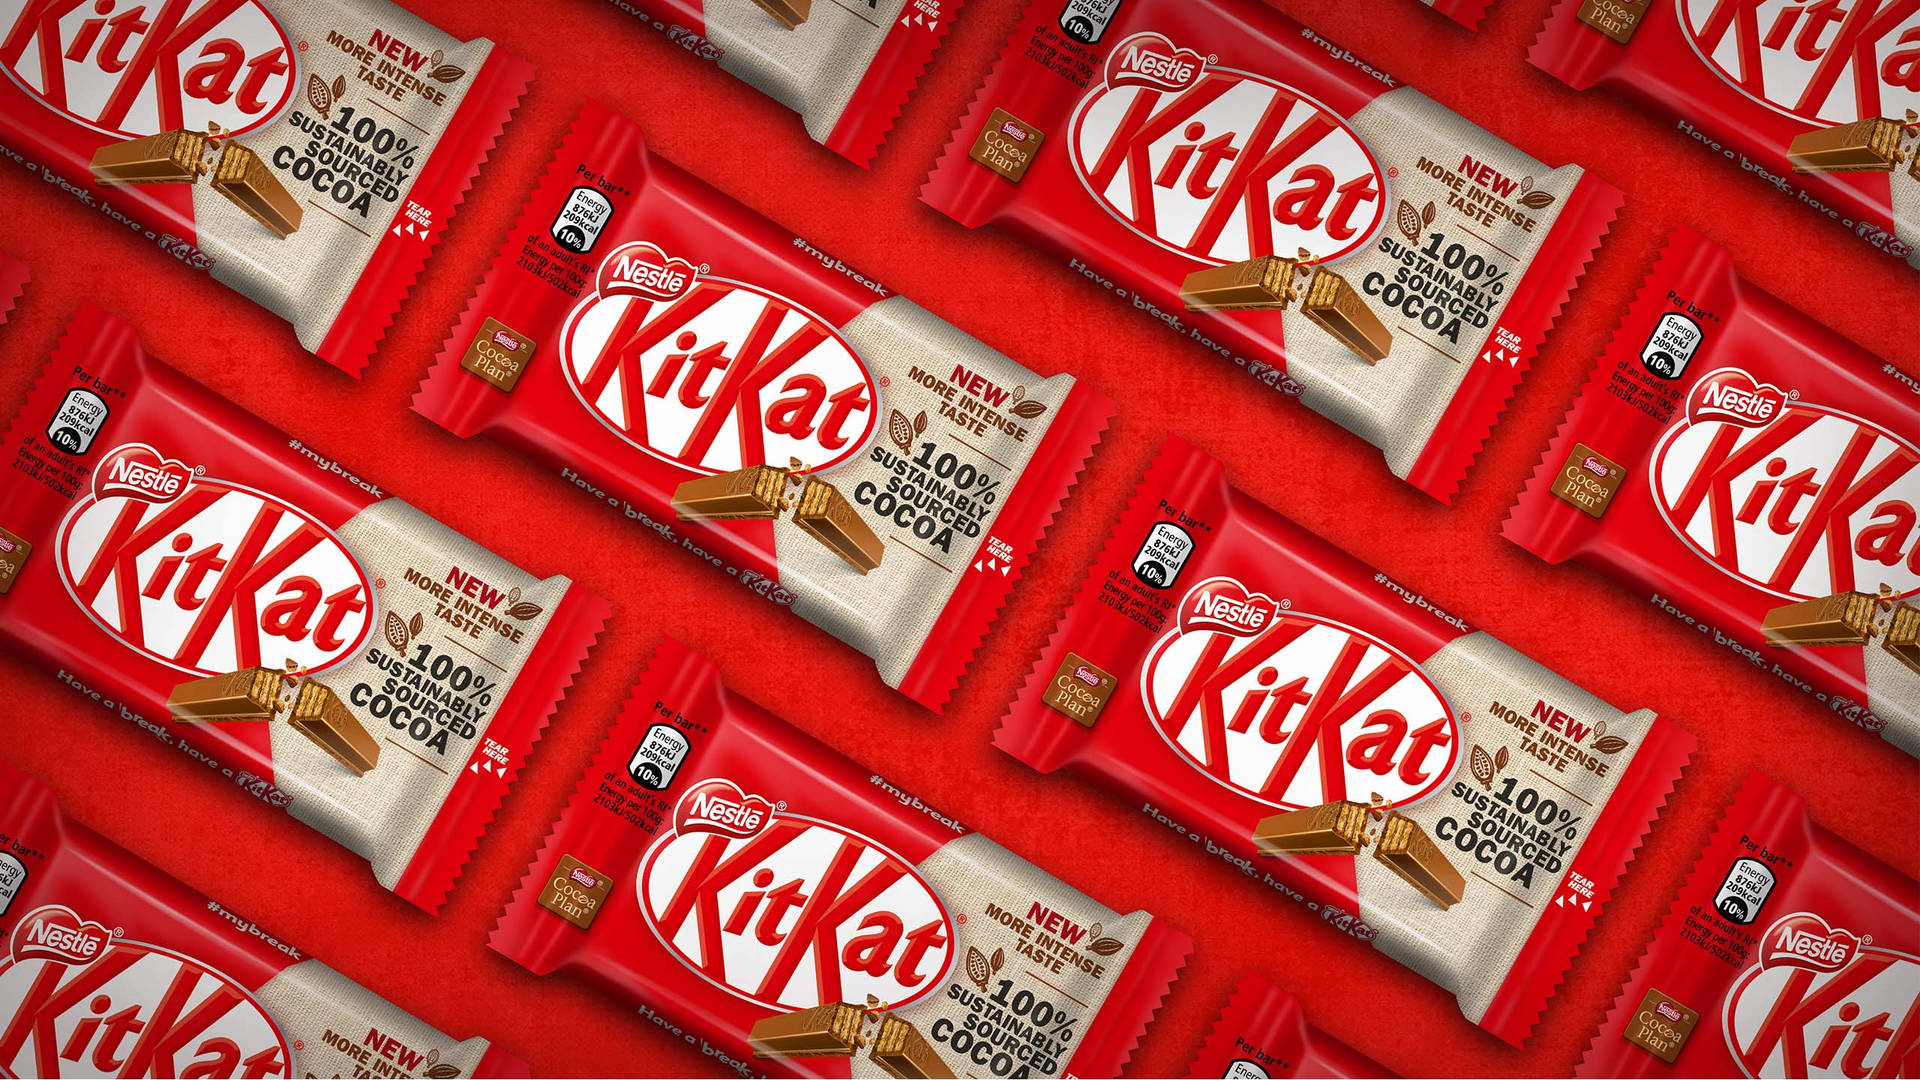 Kit Kat In Red Wrappers Wallpaper